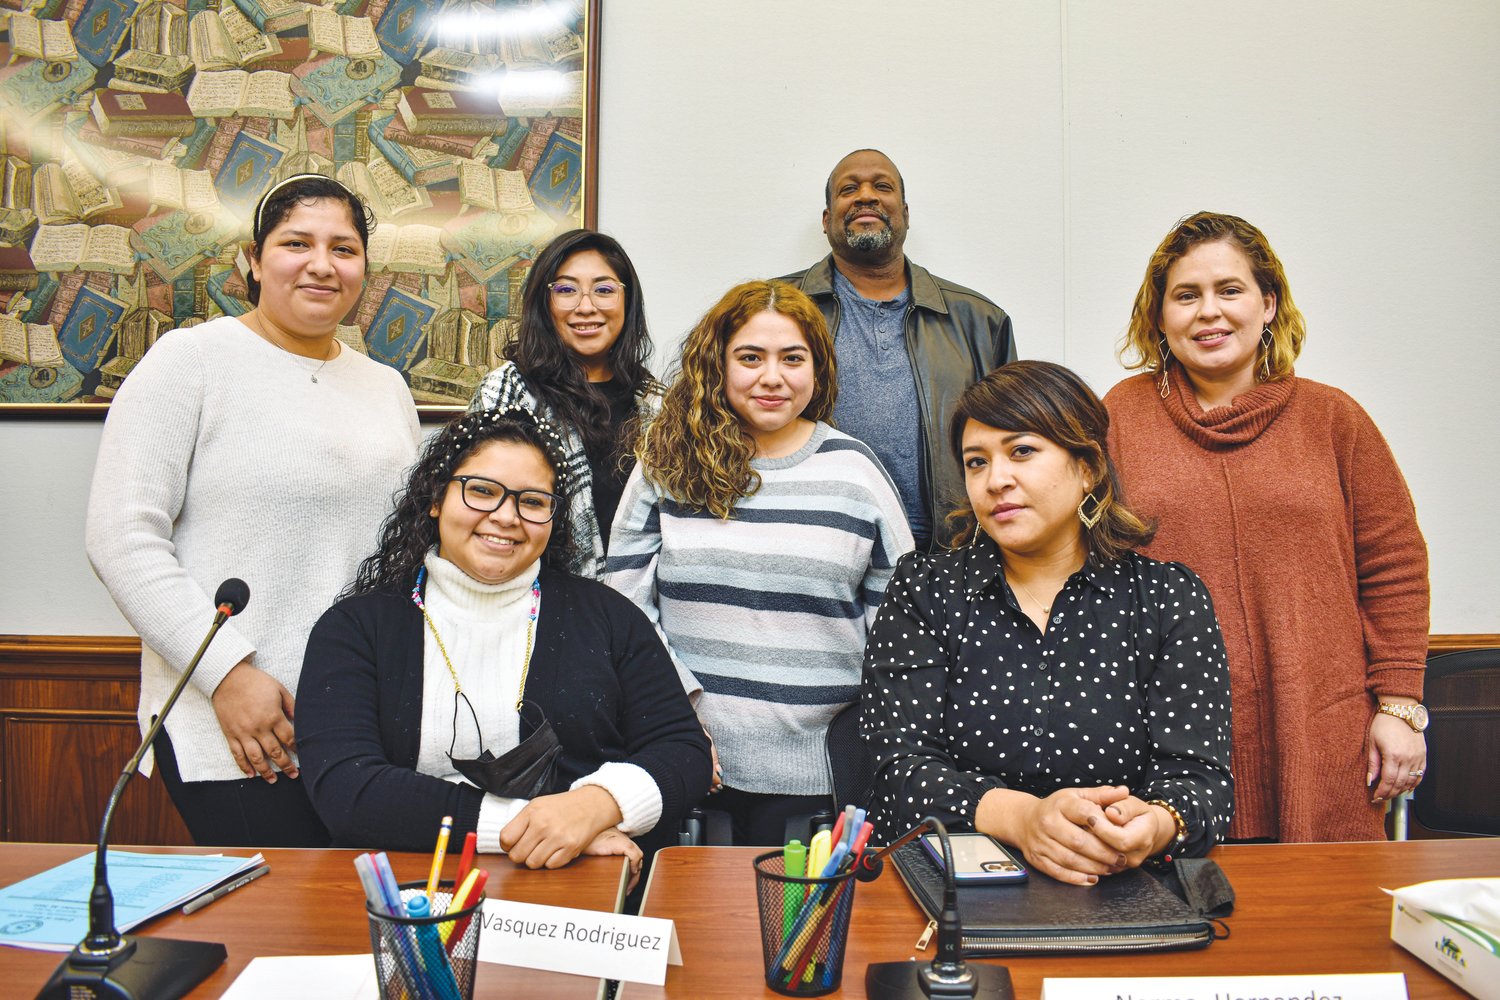 The Siler City Immigrant Community Advisory Committee held its inaugural meeting in November at the Wren Memorial Library. Back row, left to right: Hannia Benitez, Victoria Navarro, Shirley Villatoro, Carlos Simpson and Jisselle Perdomo. Front row, left to right: Danubio Vazquez Rodriguez and Norma Hernandez.